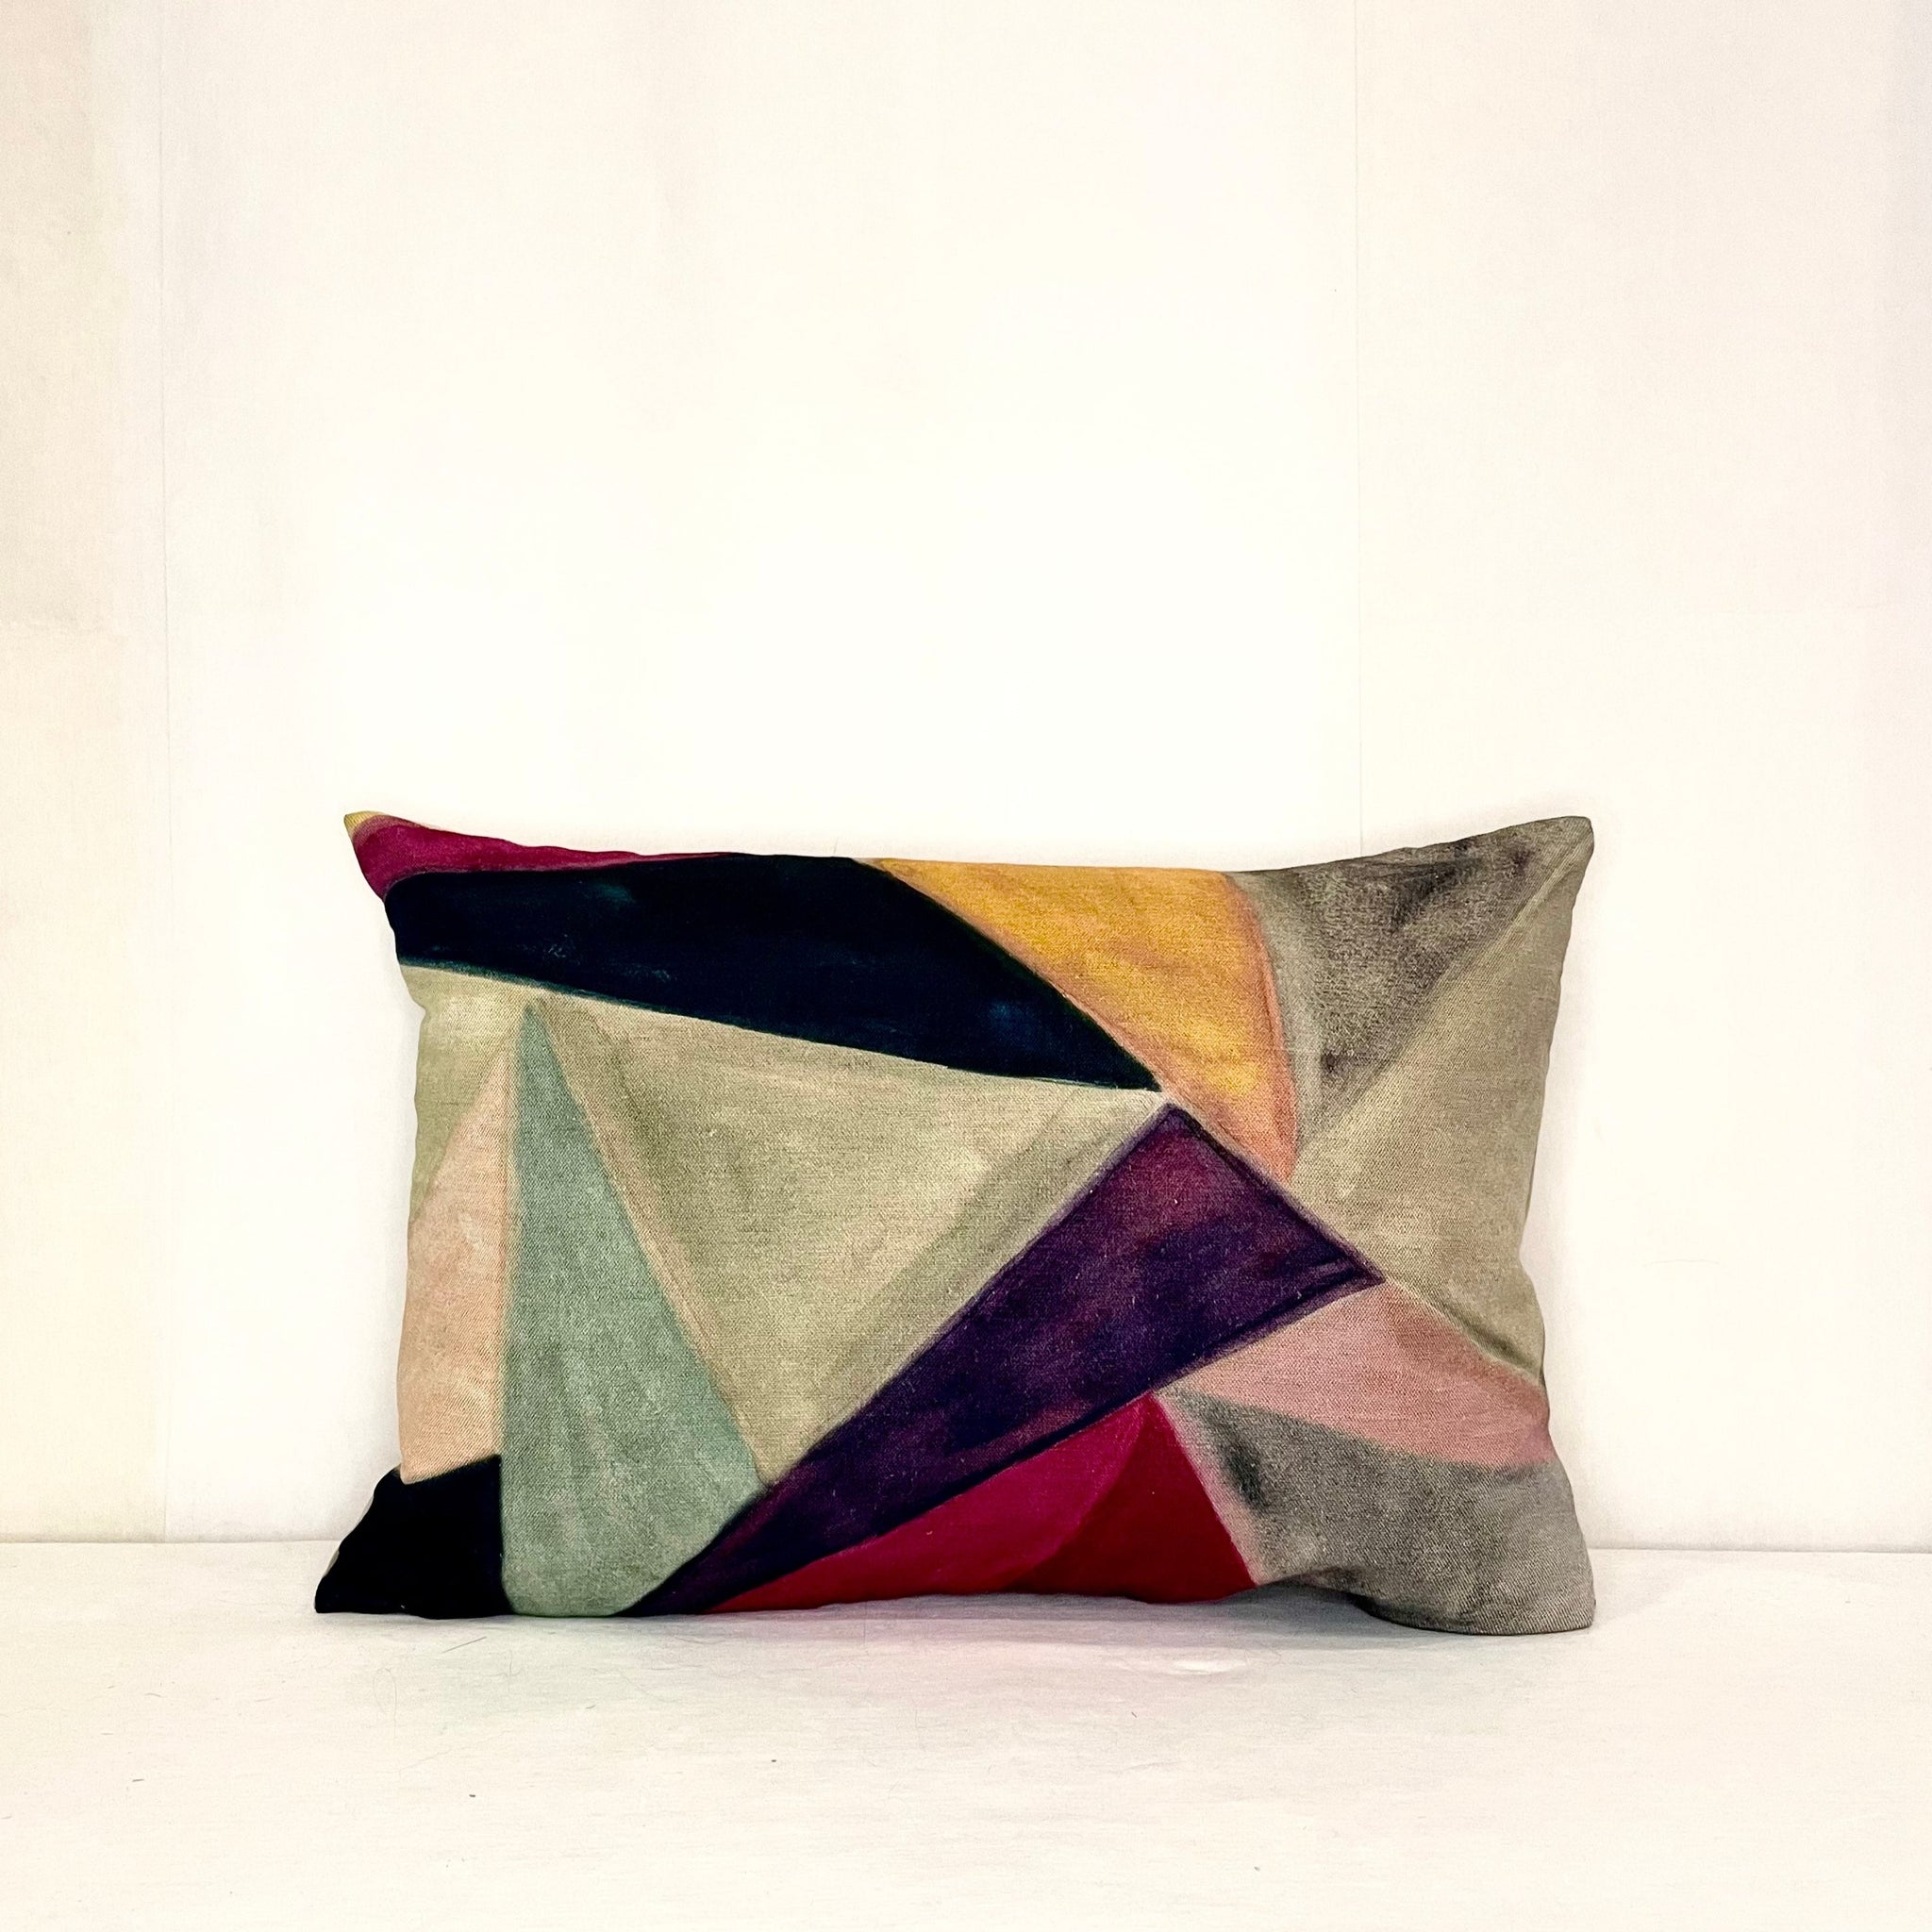 Pink, green, purple, orange and tan colors on this beautifully designed pillow. 